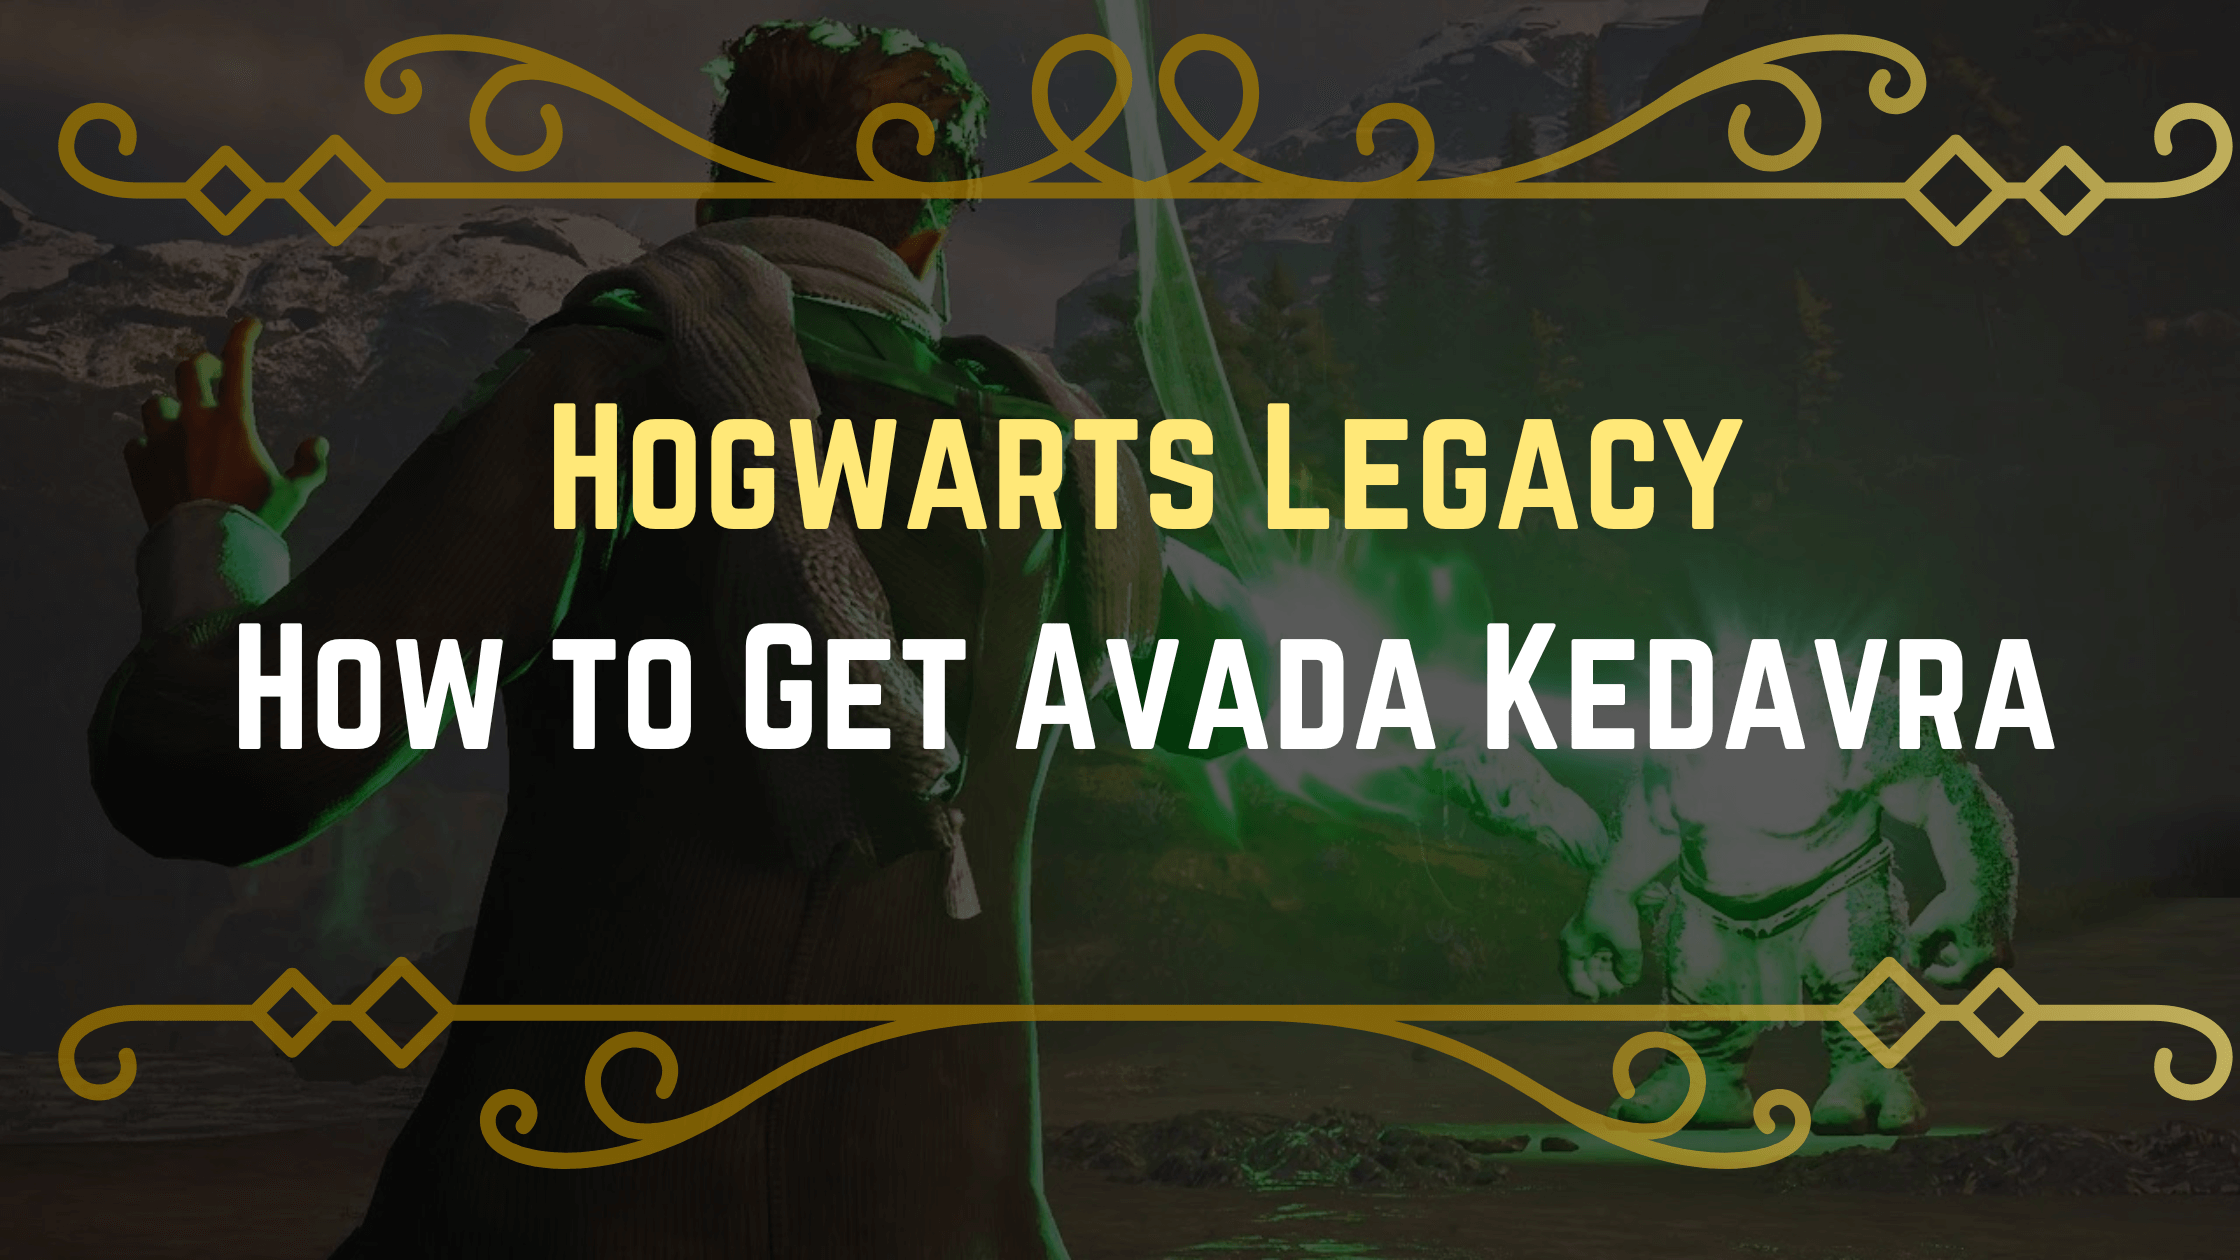 How to Get Avada Kedavra in Hogwarts Legacy